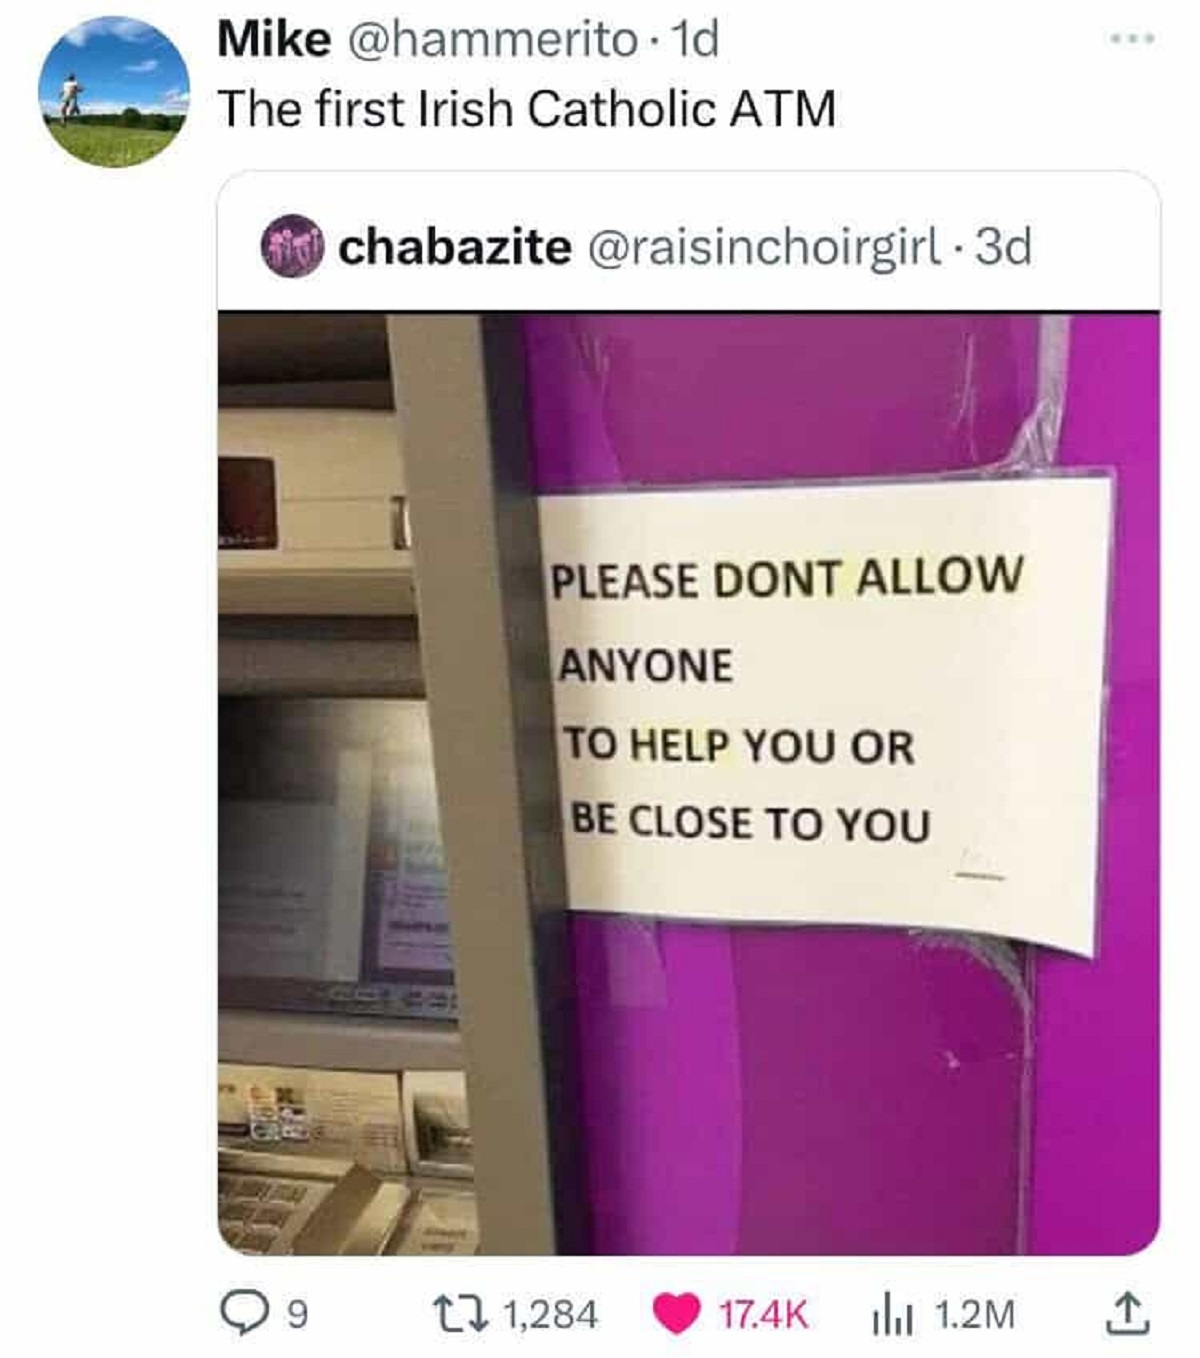 Funny meme - Mike . 1d The first Irish Catholic Atm chabazite 3d Please Dont Allow Anyone To Help You Or Be Close To You 9 1,284 ili 1.2M